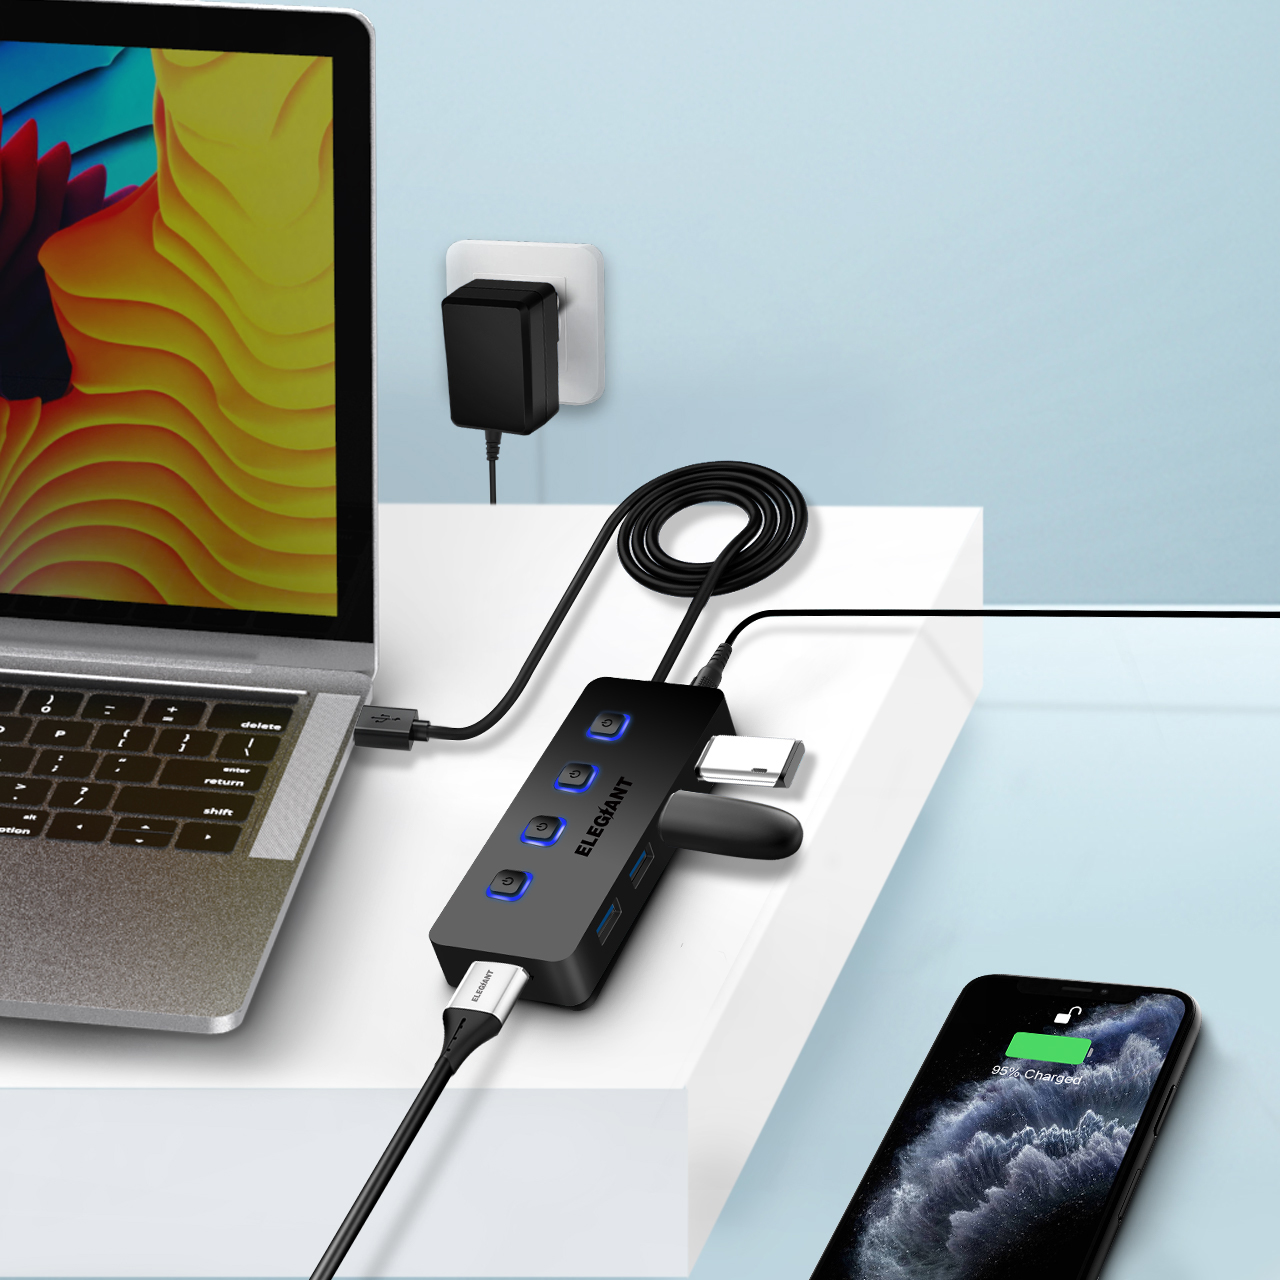 Find ELEGIANT 4 Port USB Hub 1 USB Smart Charging Port USB 3 0 Hub Powered USB Hub with Individual On/Off Switches USB Splitter with Power Adapter Supports Desktop Laptop Tablet MacBook iPad for Sale on Gipsybee.com with cryptocurrencies